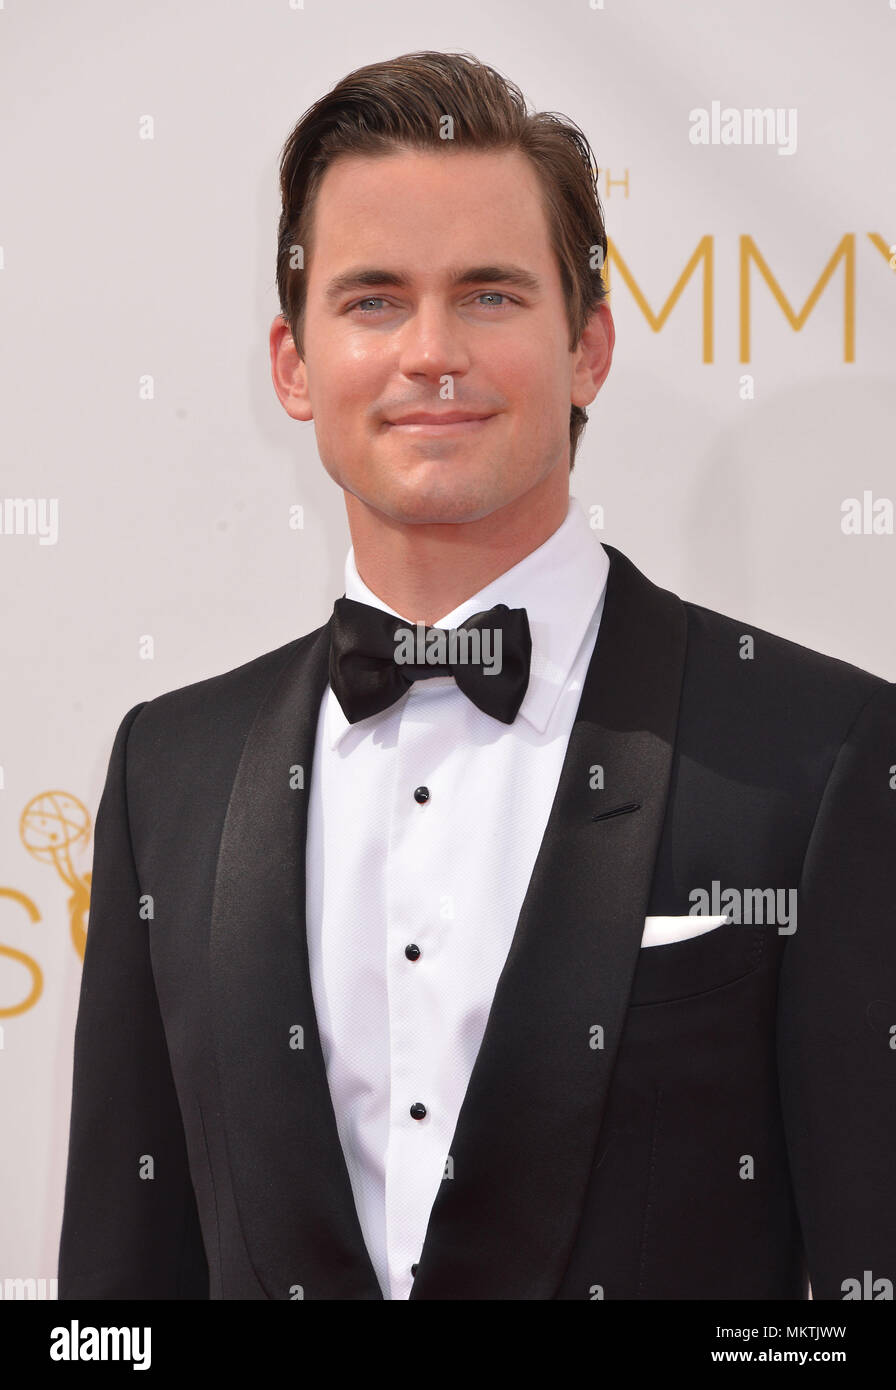 Matt Bomer at the  66th Emmy Awards 2014 at the Nokia Center in Los Angeles.Matt Bomer Red Carpet Event, Vertical, USA, Film Industry, Celebrities,  Photography, Bestof, Arts Culture and Entertainment, Topix Celebrities fashion /  Vertical, Best of, Event in Hollywood Life - California,  Red Carpet and backstage, USA, Film Industry, Celebrities,  movie celebrities, TV celebrities, Music celebrities, Photography, Bestof, Arts Culture and Entertainment,  Topix, headshot, vertical, one person,, from the year , 2014, inquiry tsuni@Gamma-USA.com Stock Photo